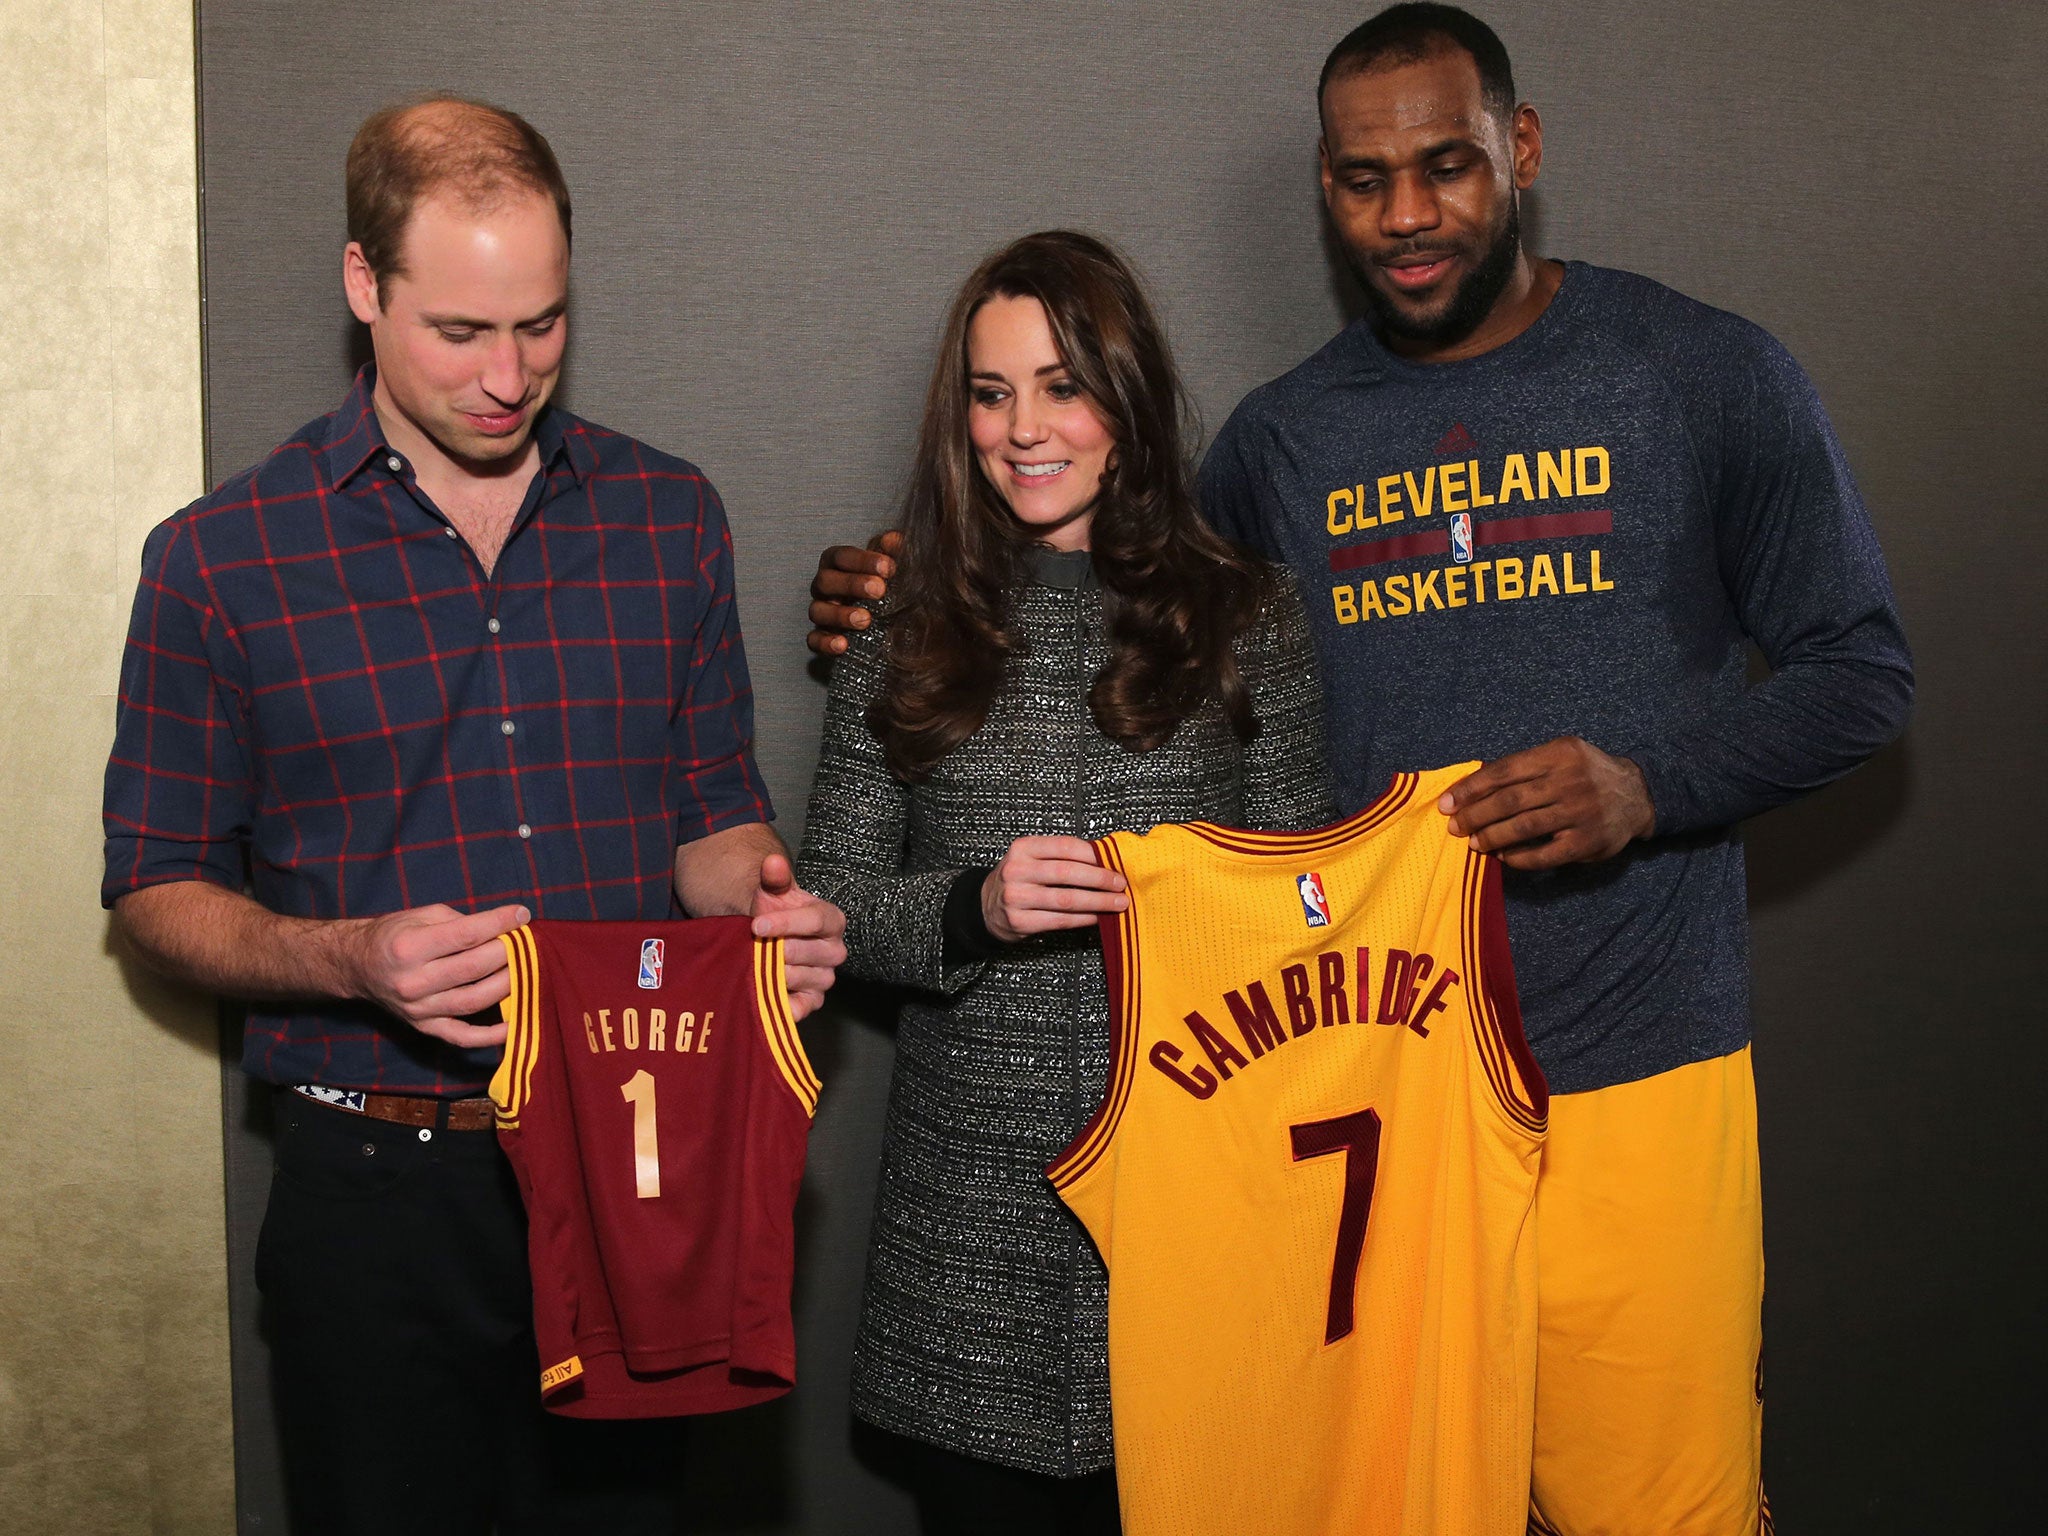 Prince William and Catherine, Duchess of Cambridge pose with LeBron James as they attend the Cleveland Cavaliers vs. Brooklyn Nets NBA game at Barclays Center in the Brooklyn borough of New York